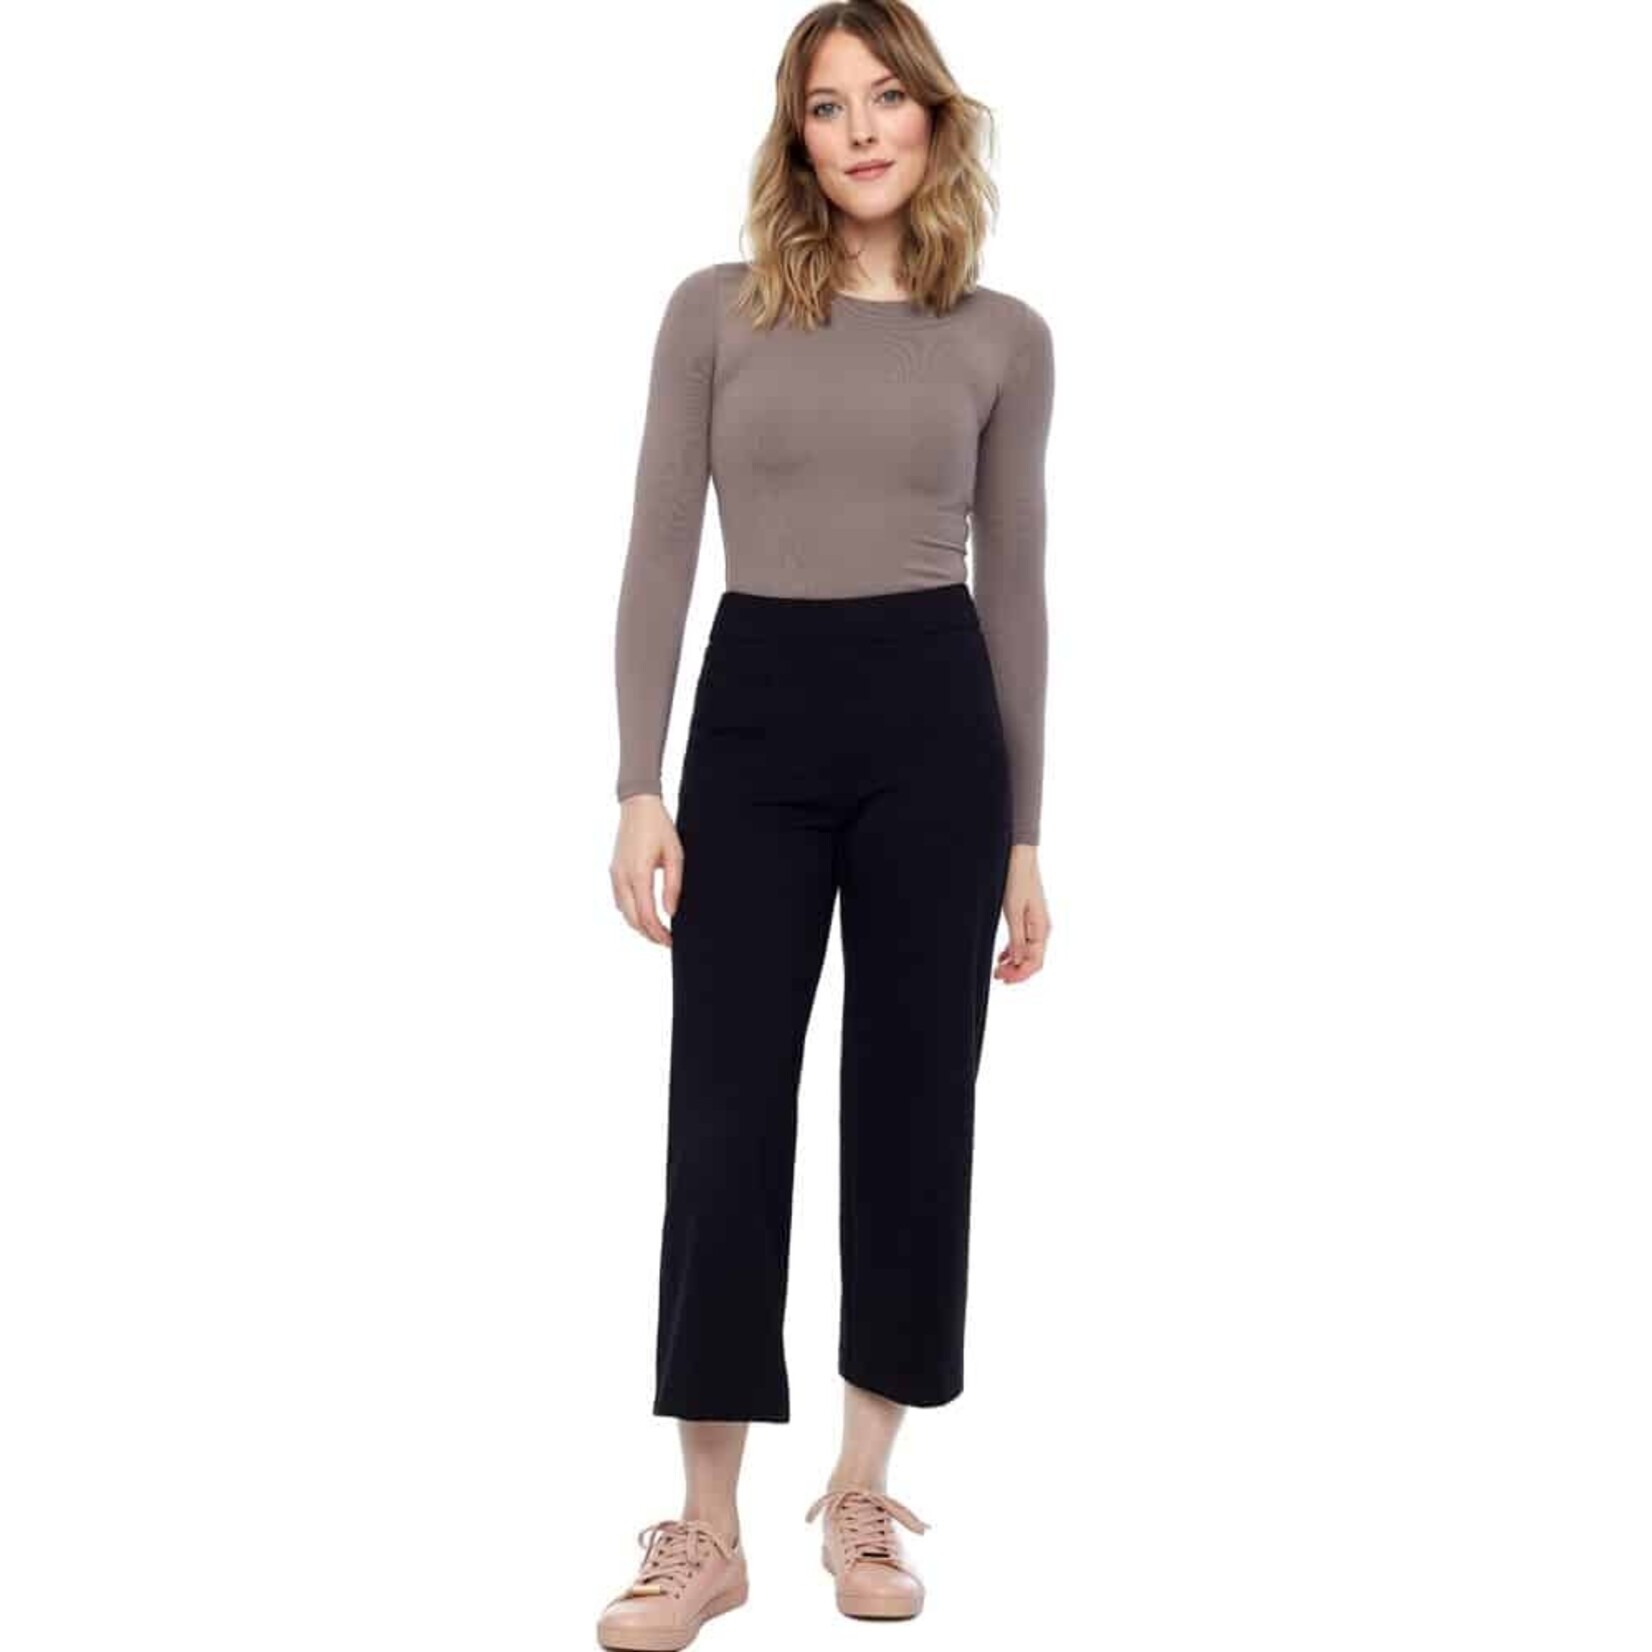 Up Pants Essential Cropped Pant